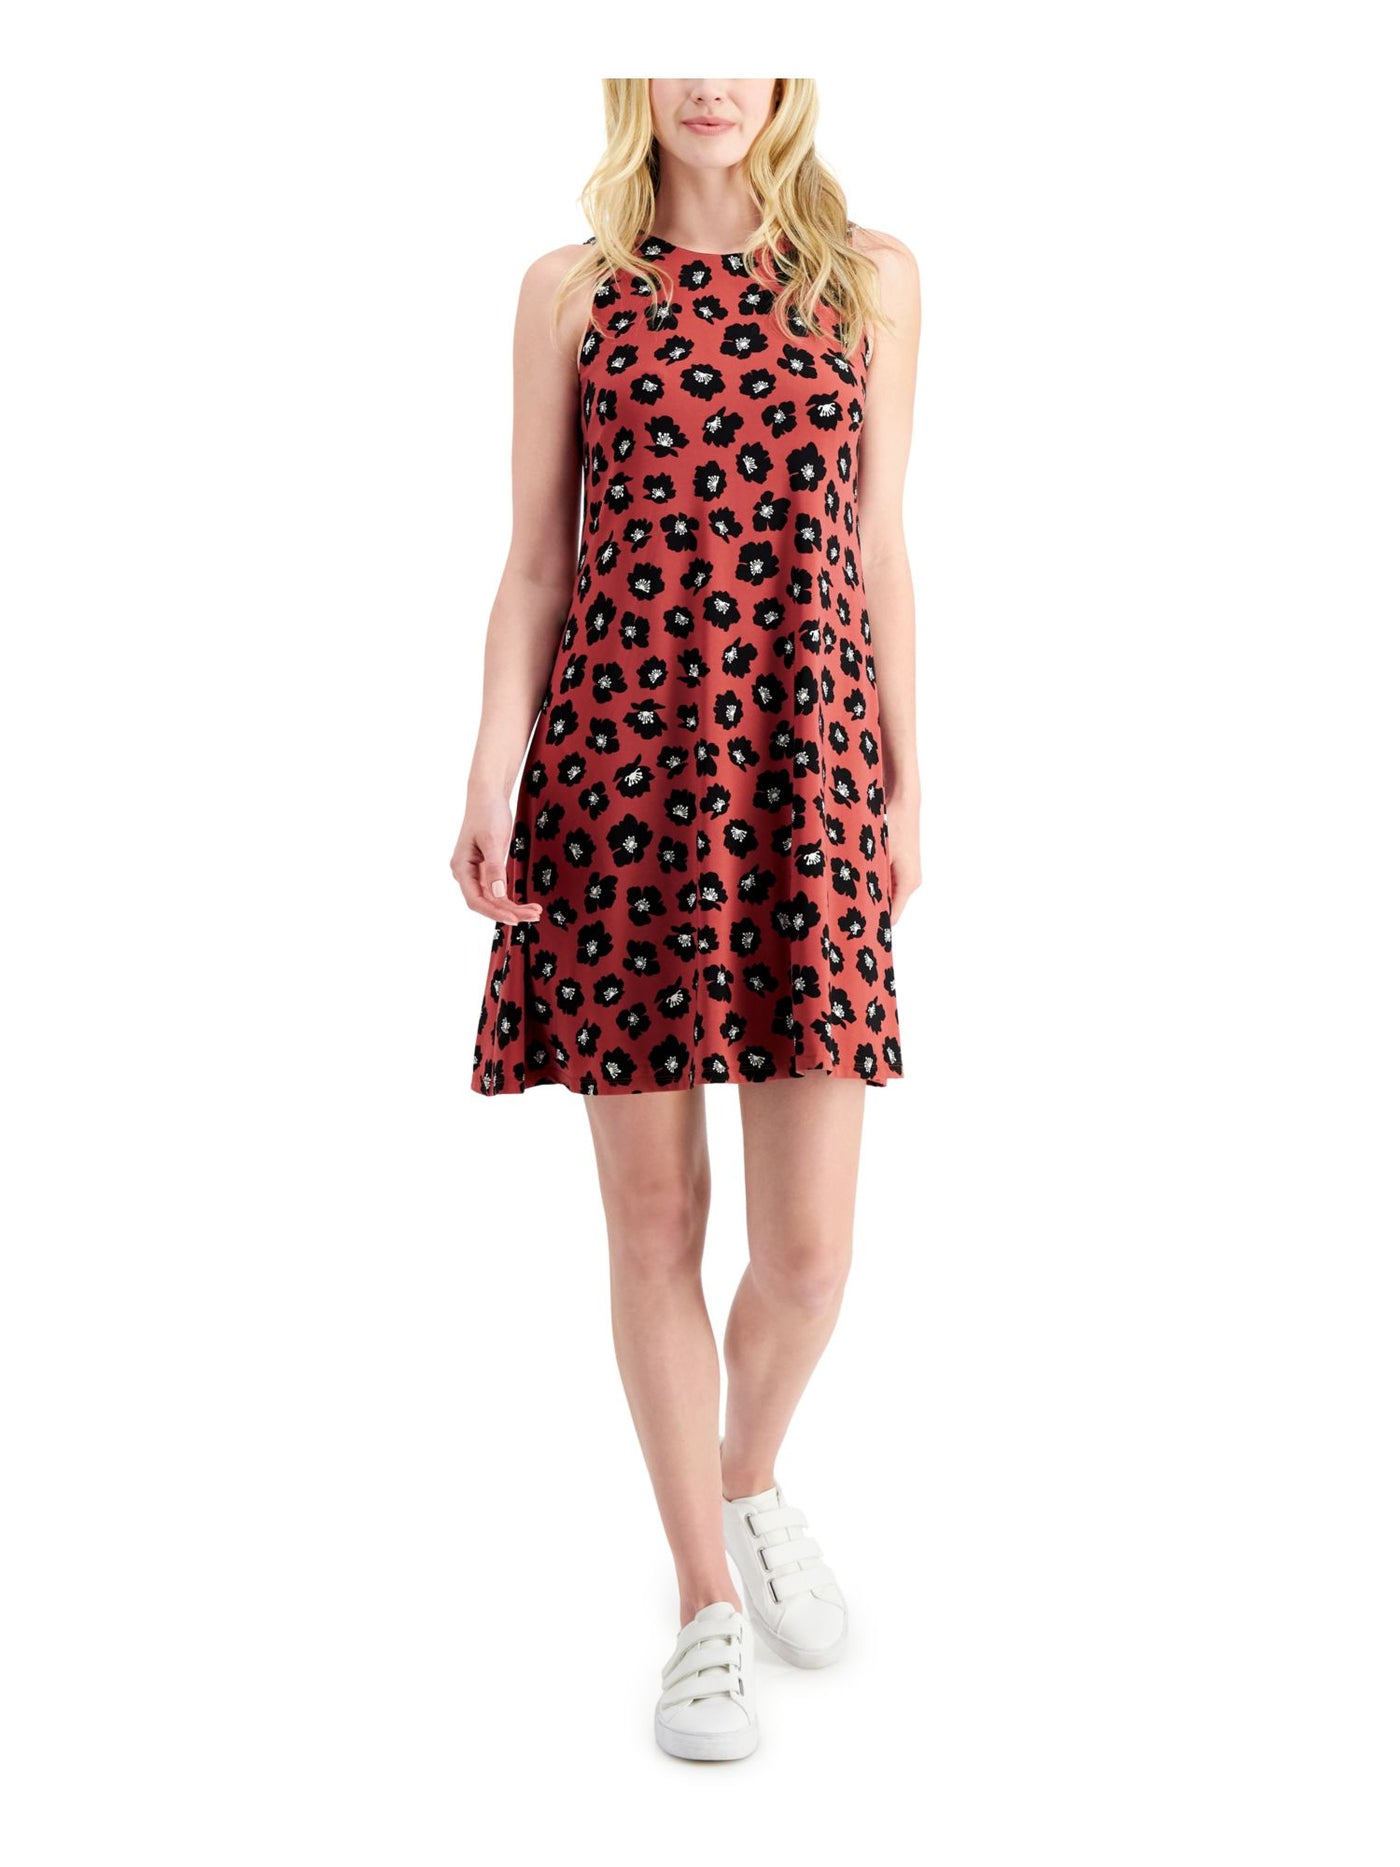 ANNE KLEIN Womens Red Stretch Printed Sleeveless Jewel Neck Above The Knee Fit + Flare Dress XS